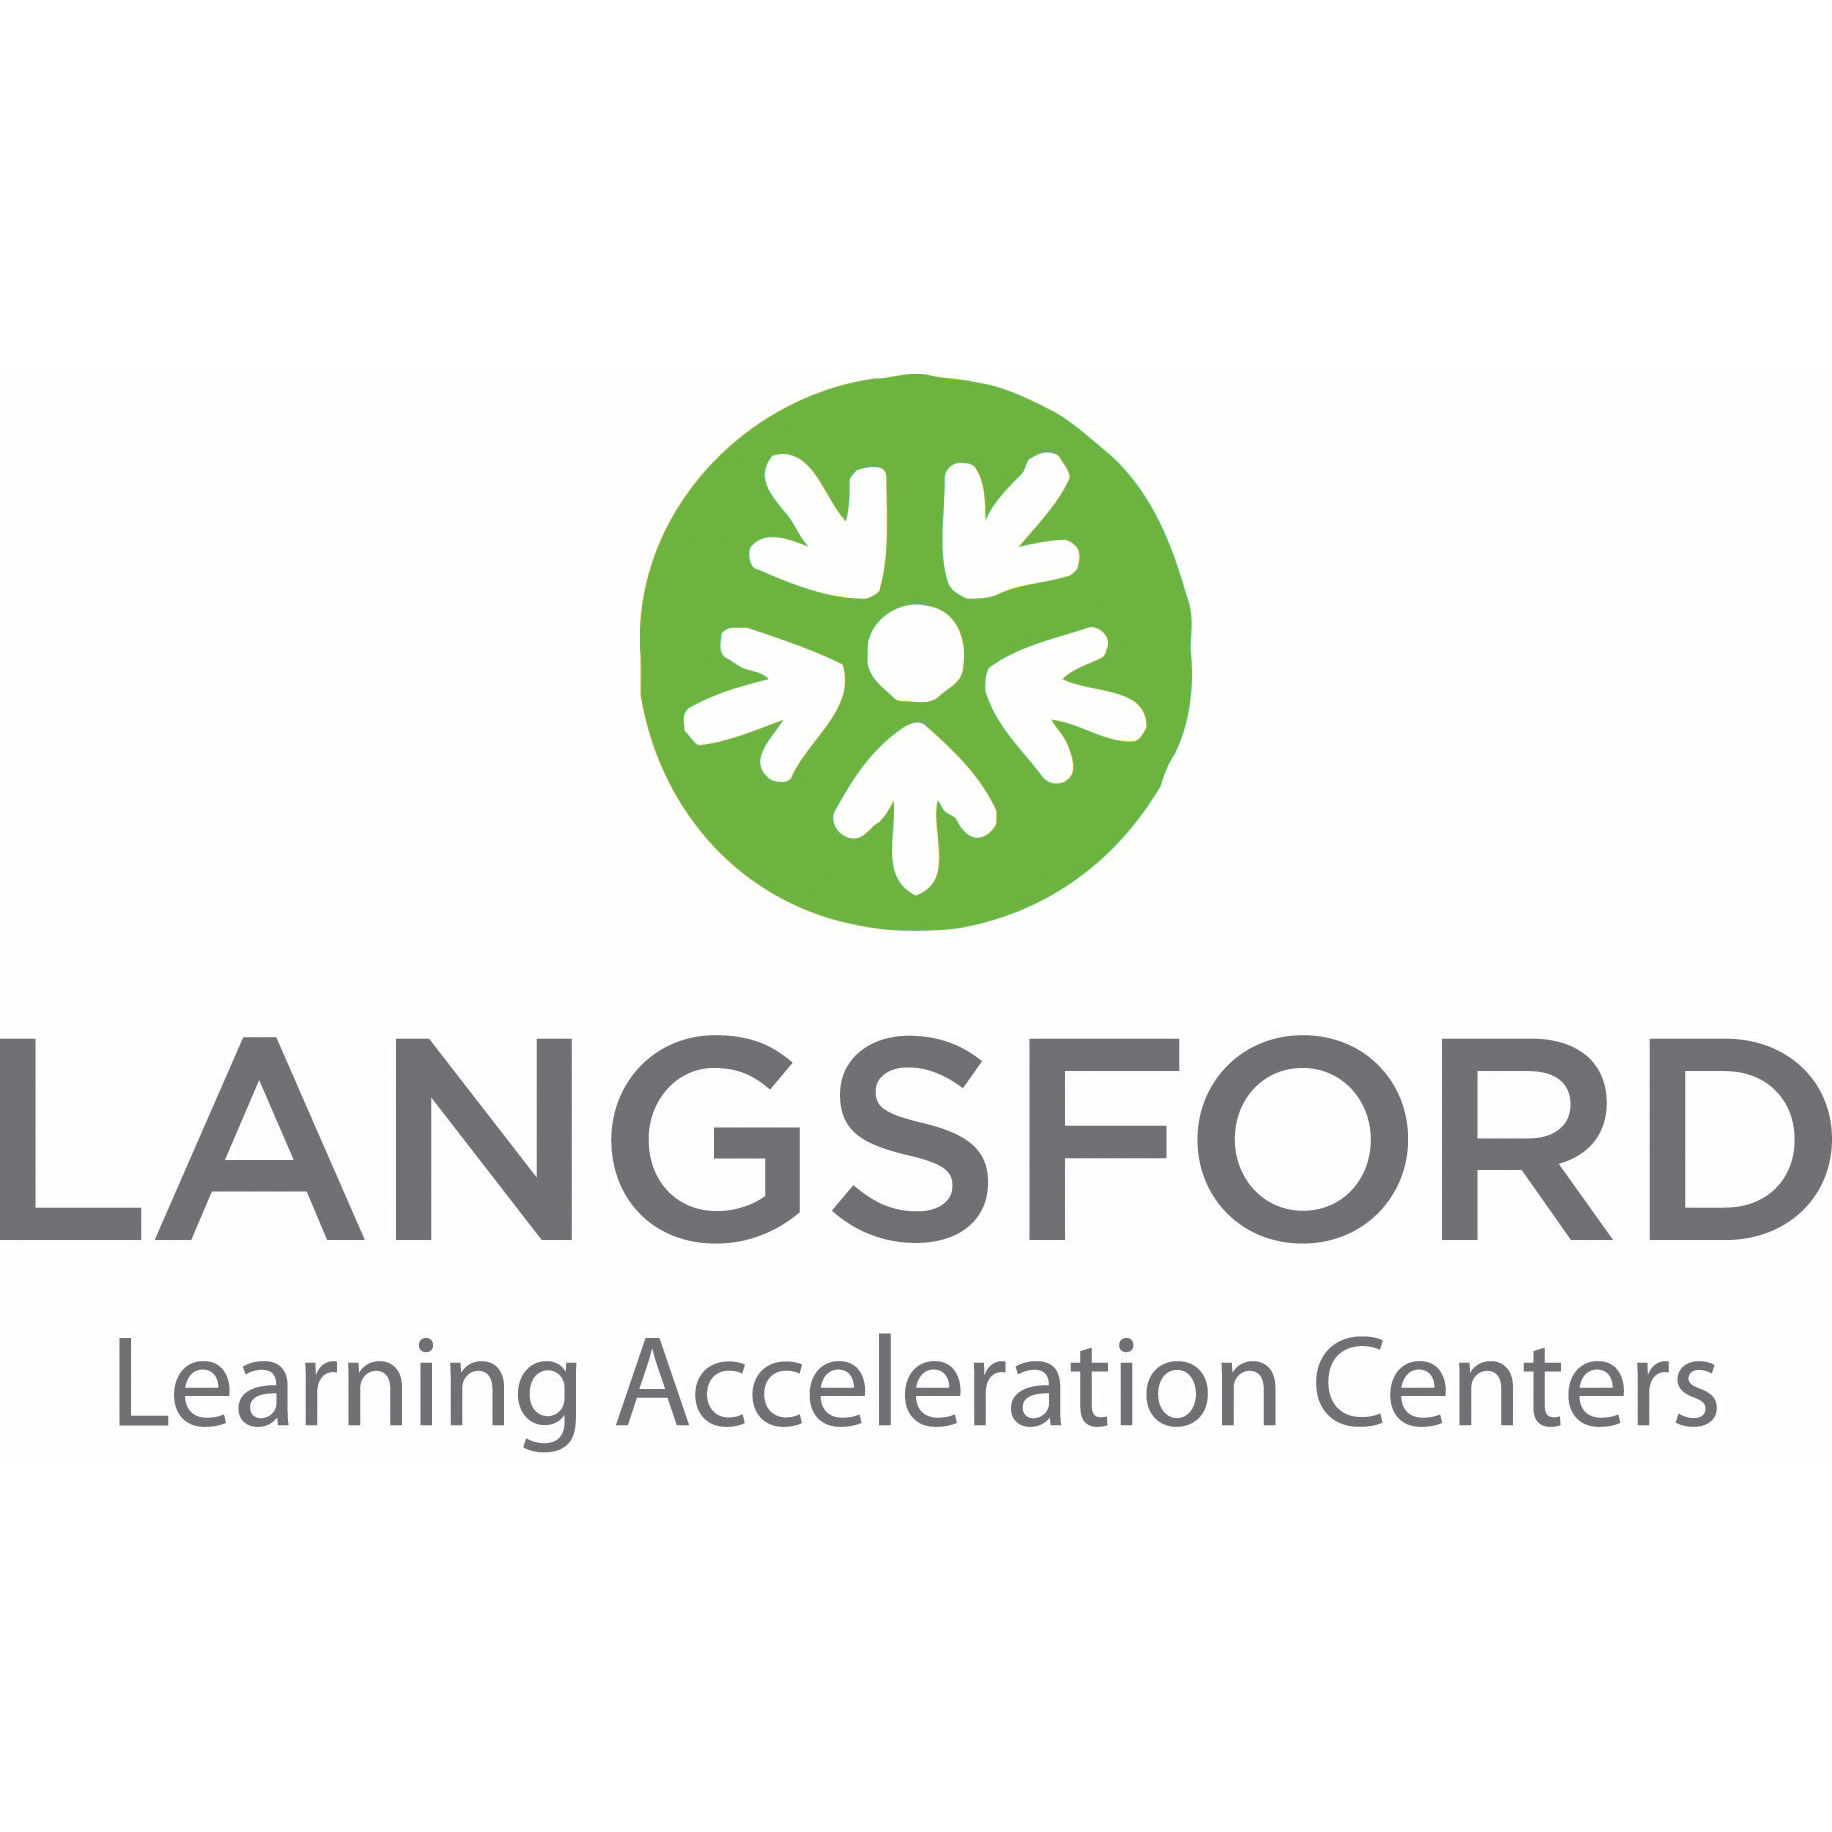 Langsford Learning Acceleration Centers Logo